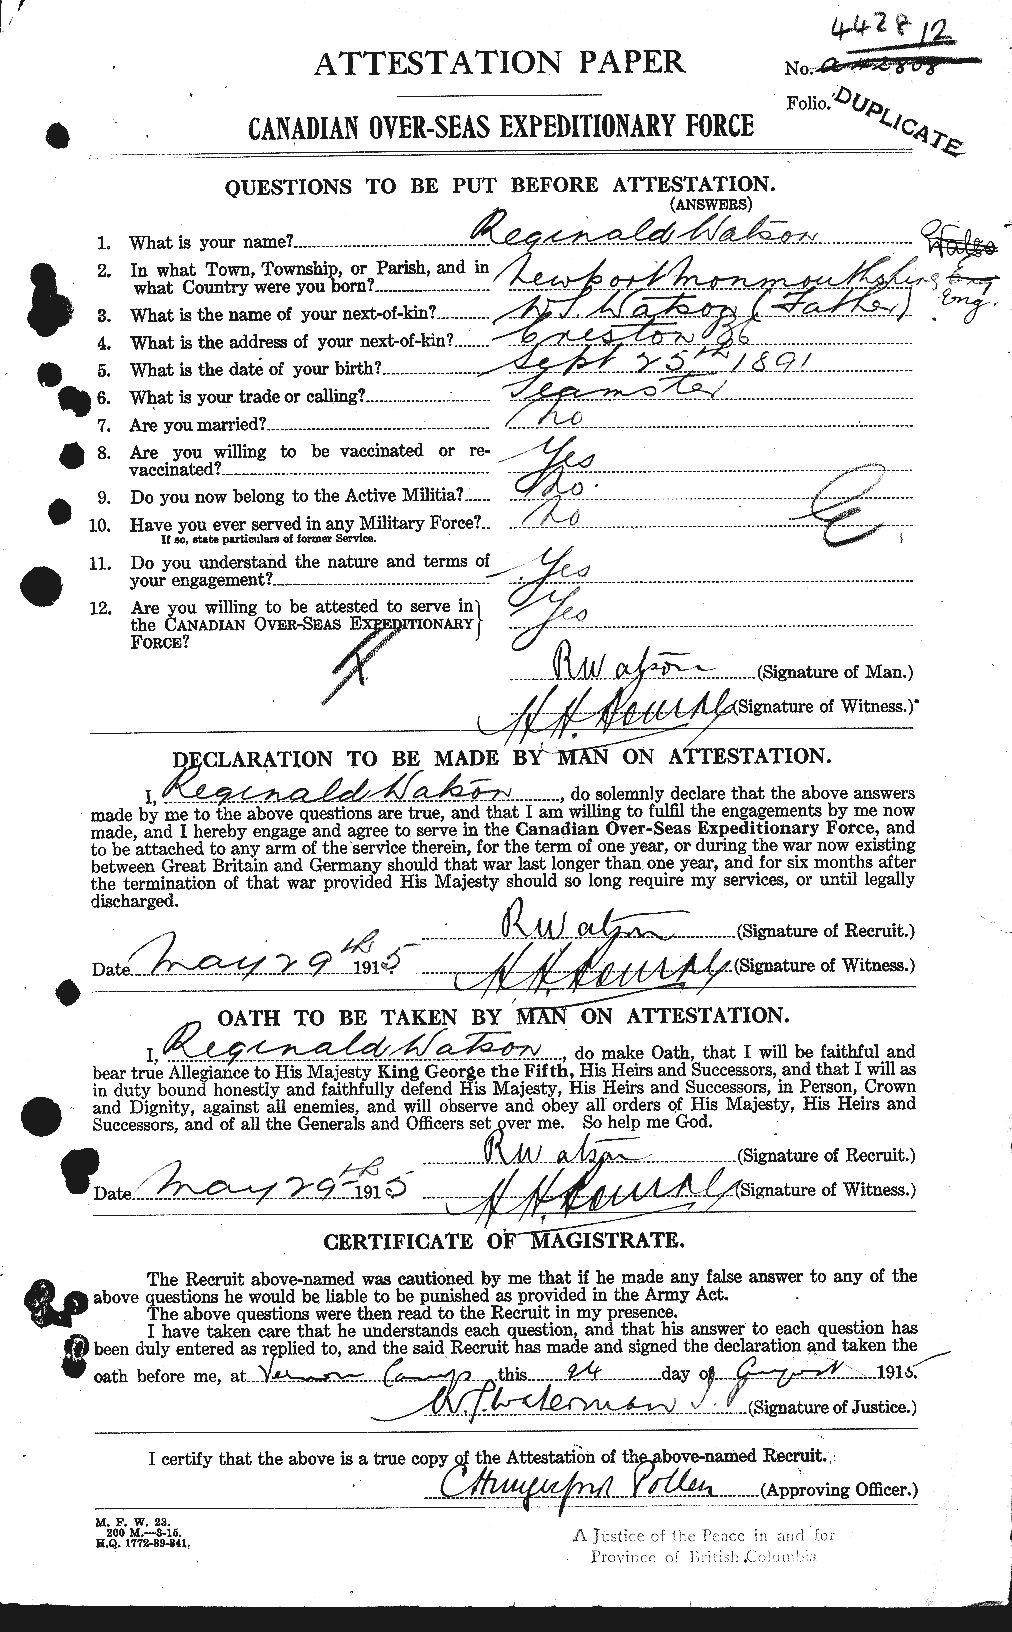 Personnel Records of the First World War - CEF 661175a